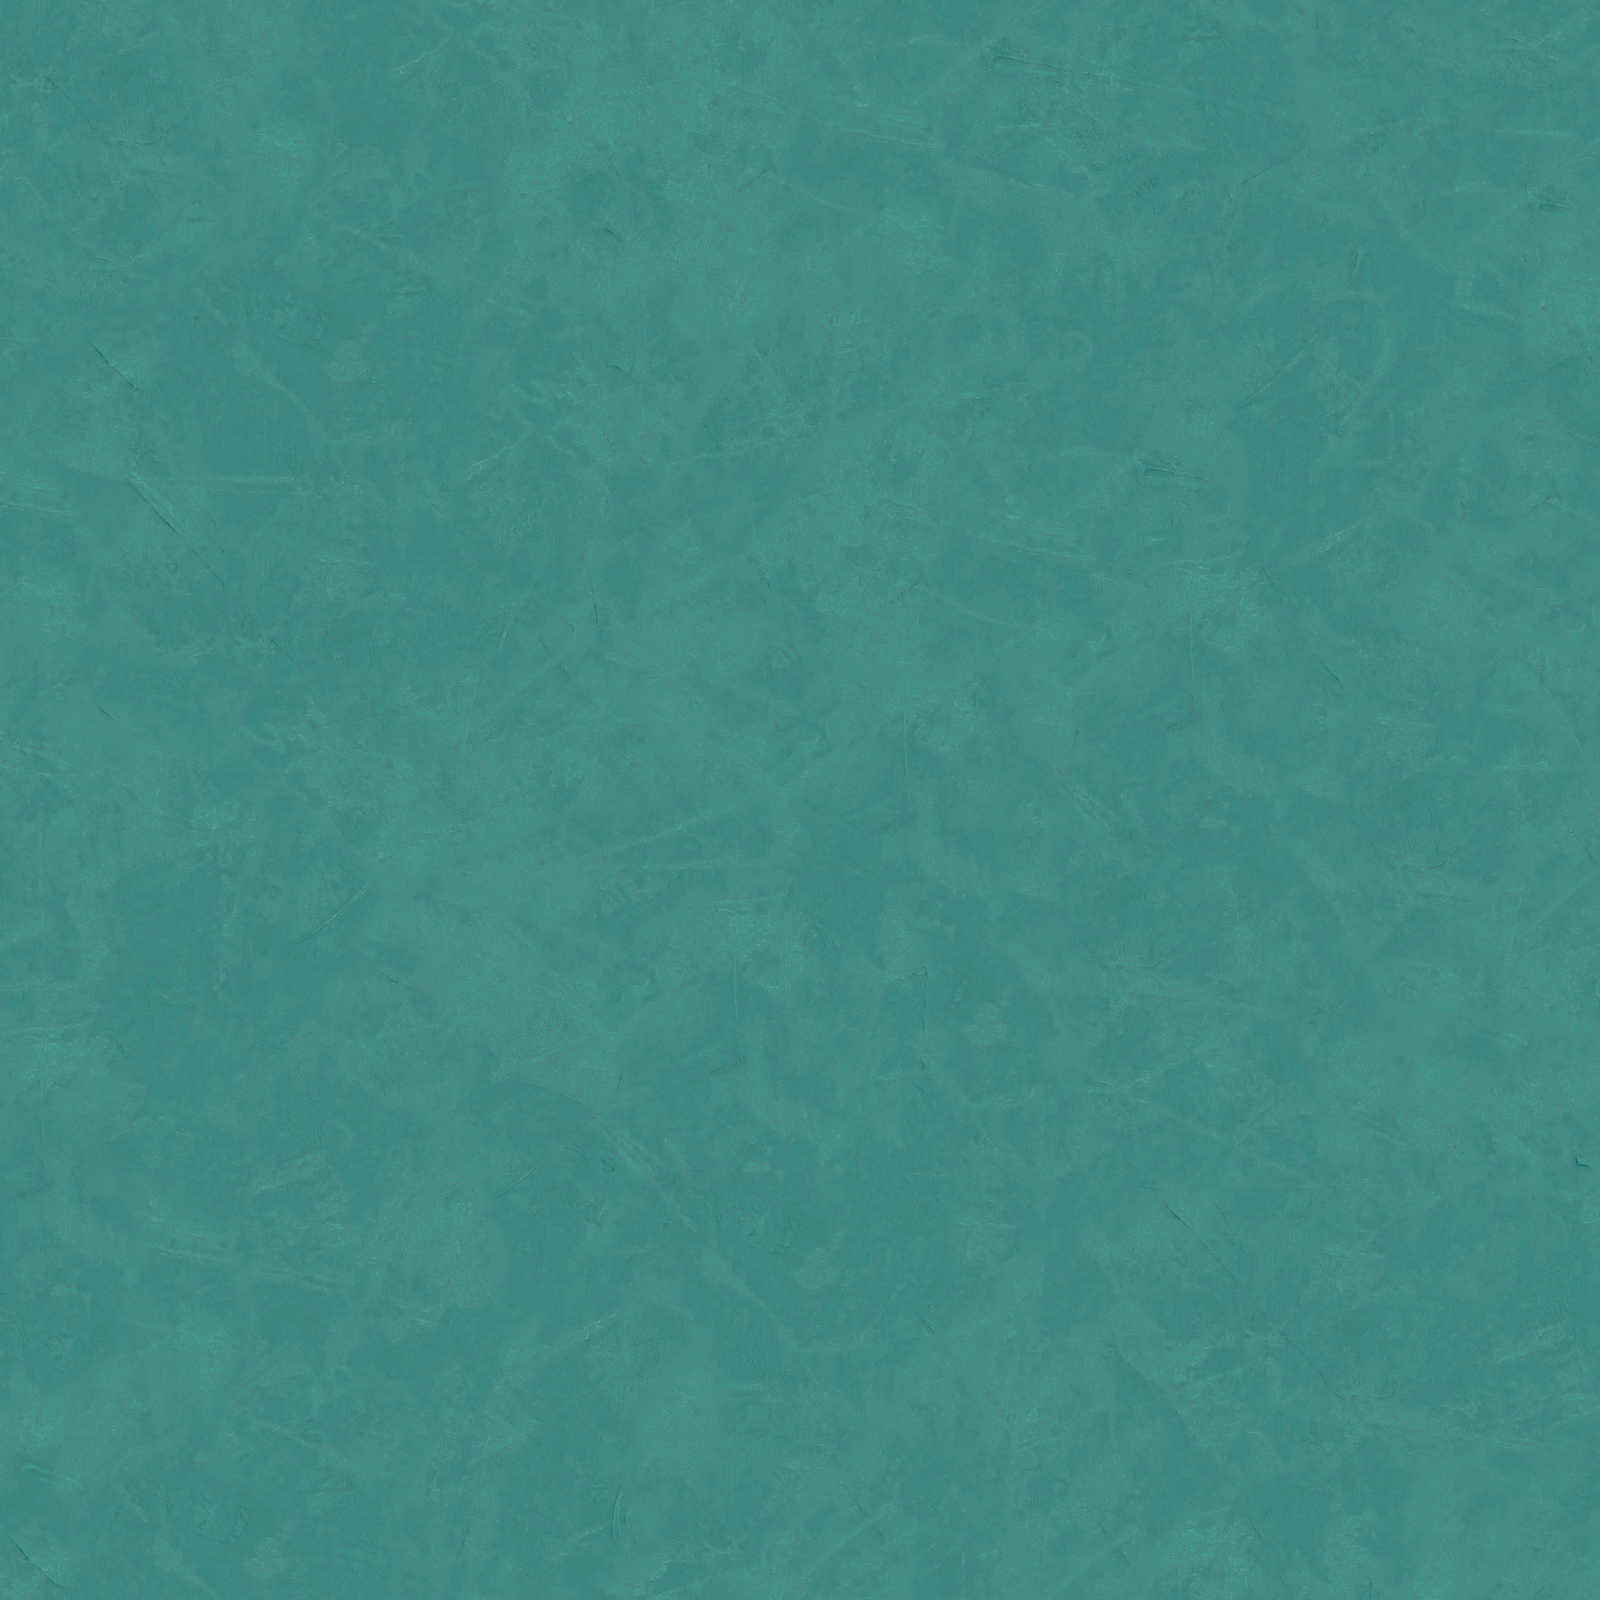 Non-woven wallpaper plaster look & texture pattern - petrol, turquoise
